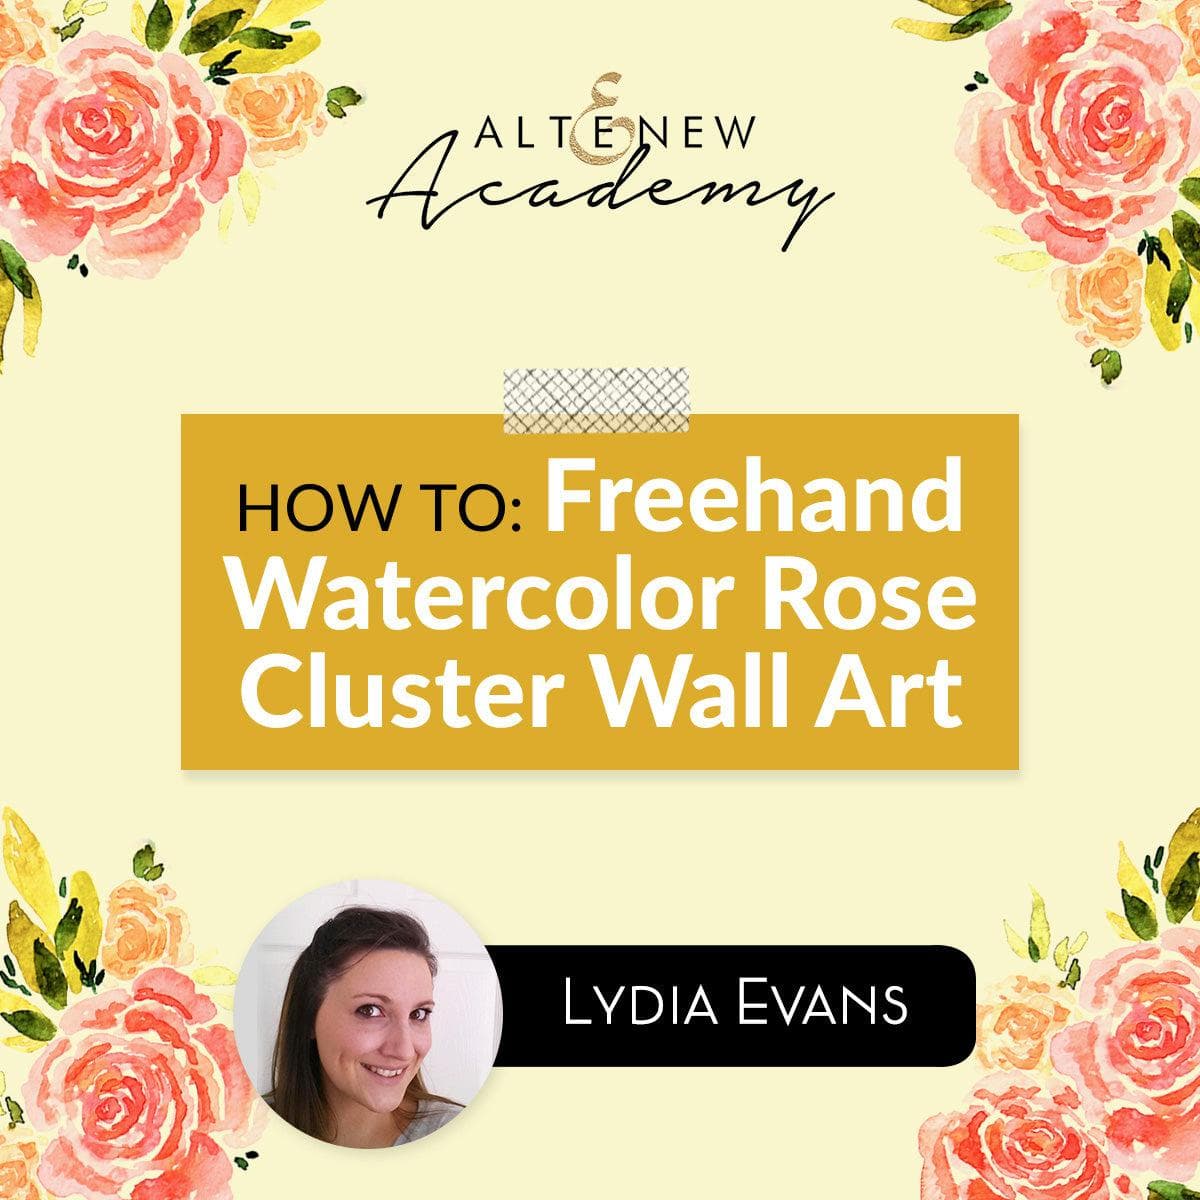 Altenew Class How to: Freehand Watercolor Rose Cluster Wall Art